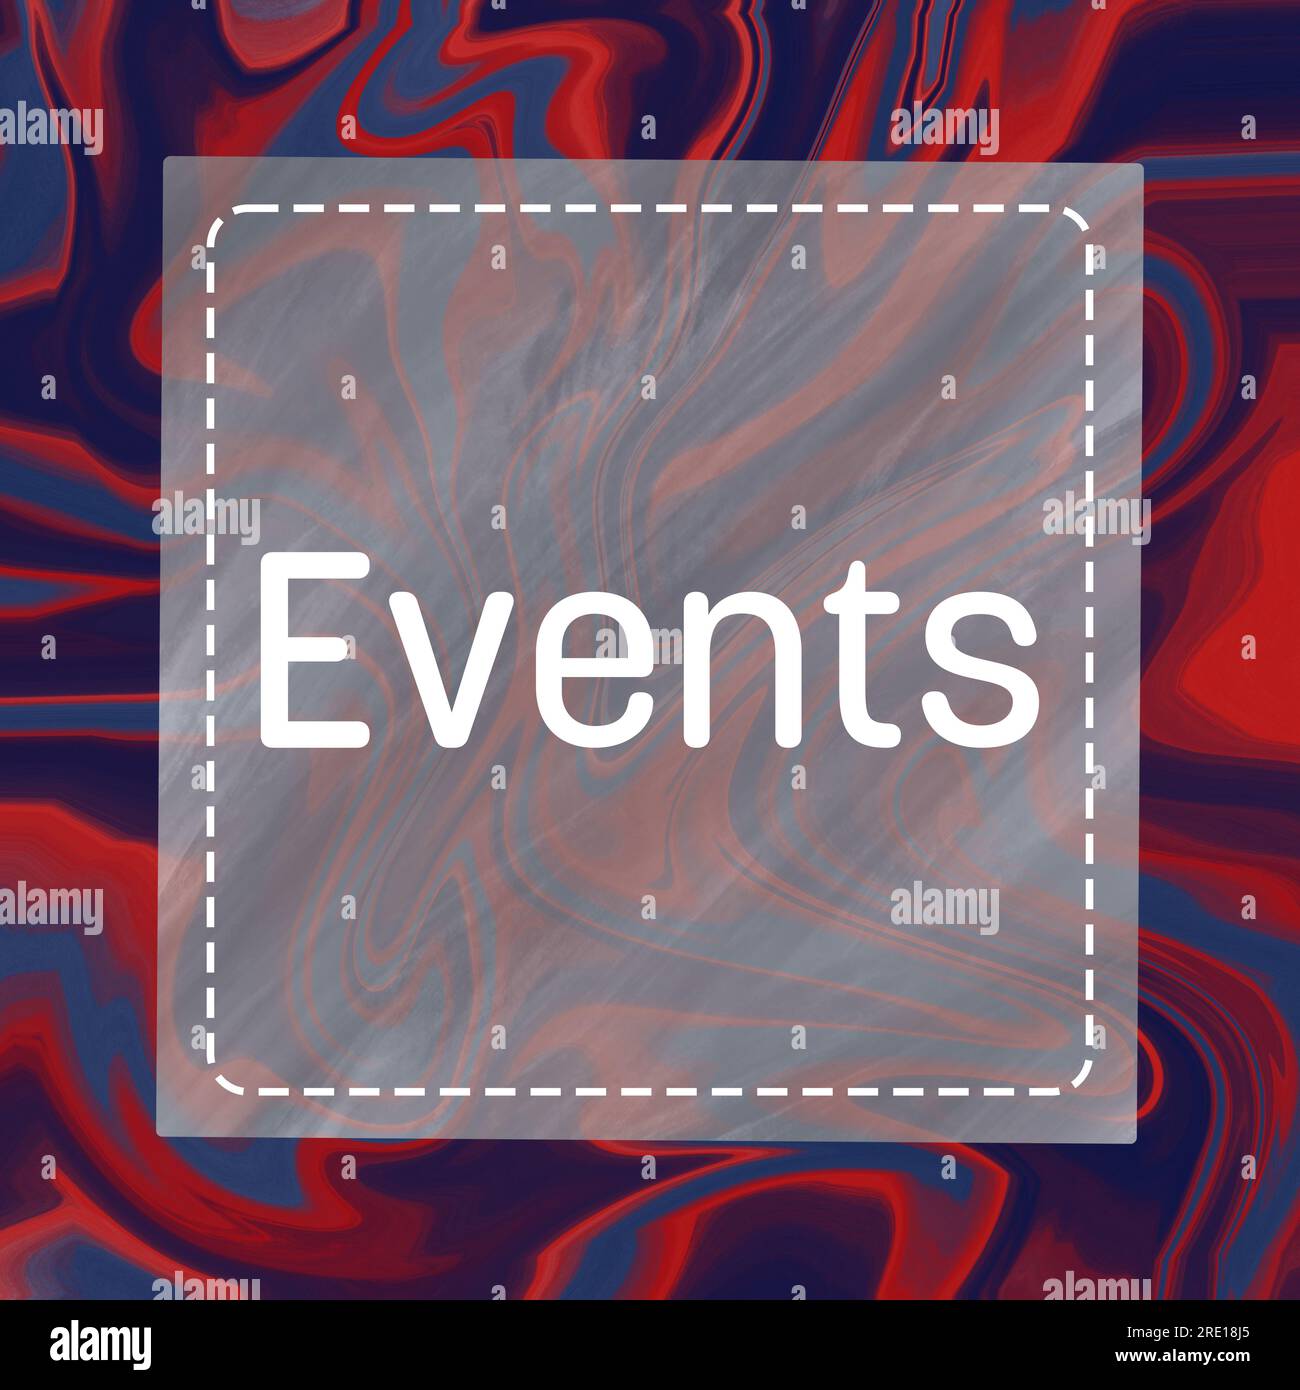 Events Red Blue Liquid Effect Background Square Text Stock Photo